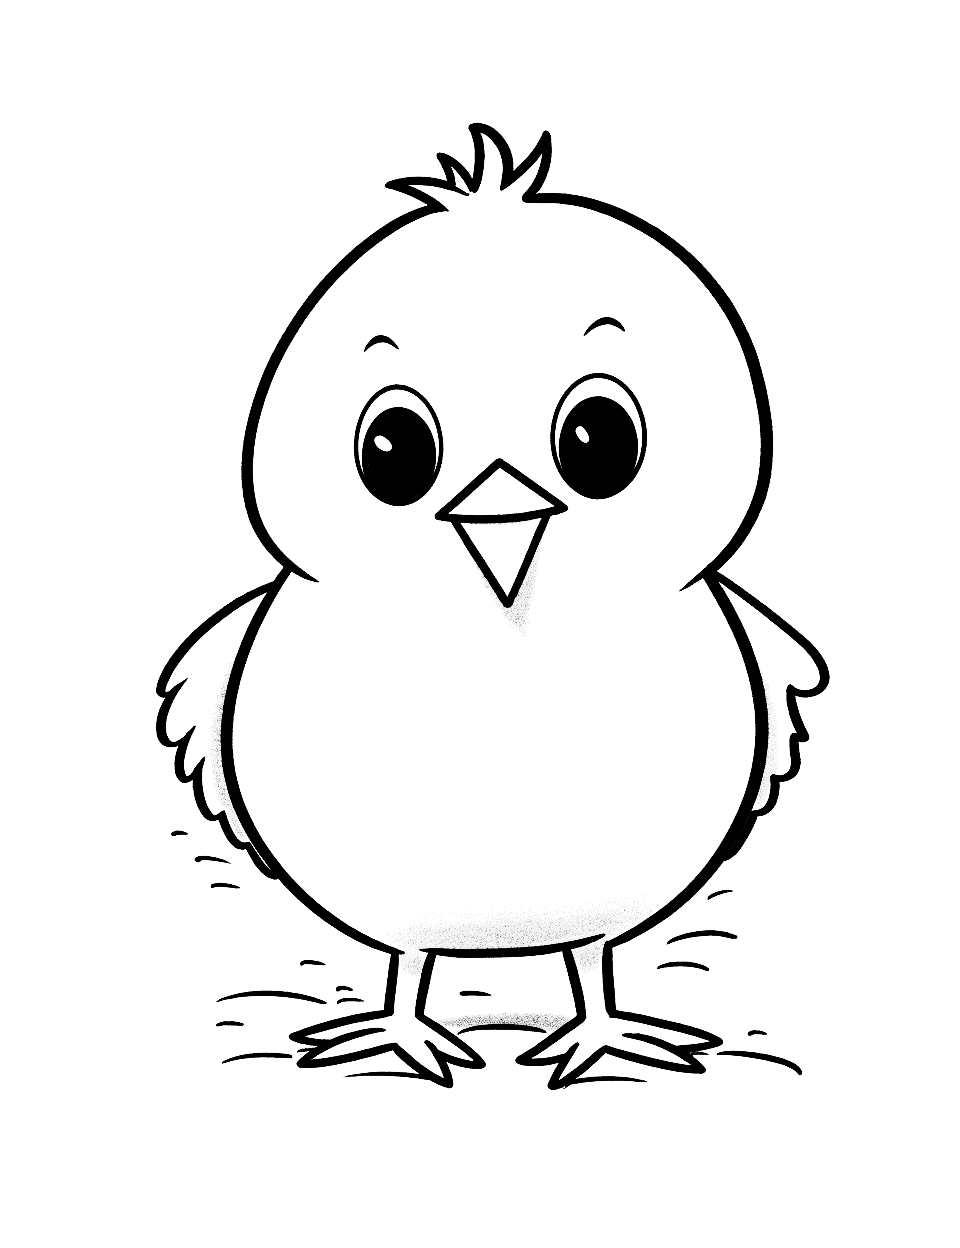 Adorable Chick Easter Coloring Page - A small and fluffy chick with big eyes and a wide open mouth.